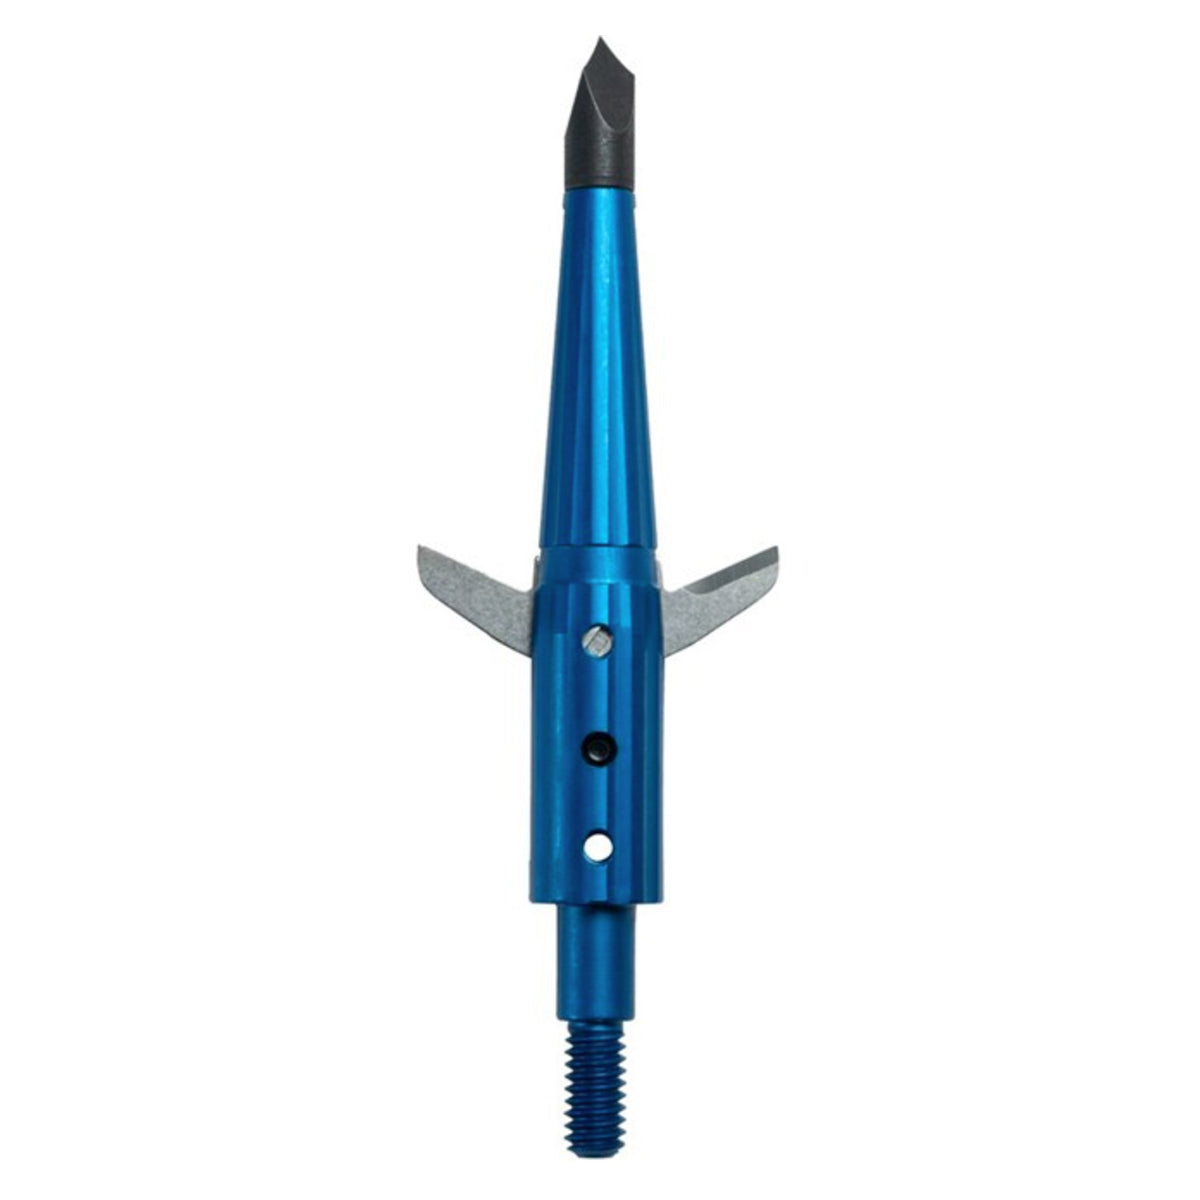 Swhacker Levi Morgan Signature Series #269 Broadheads in  by GOHUNT | Swhacker - GOHUNT Shop